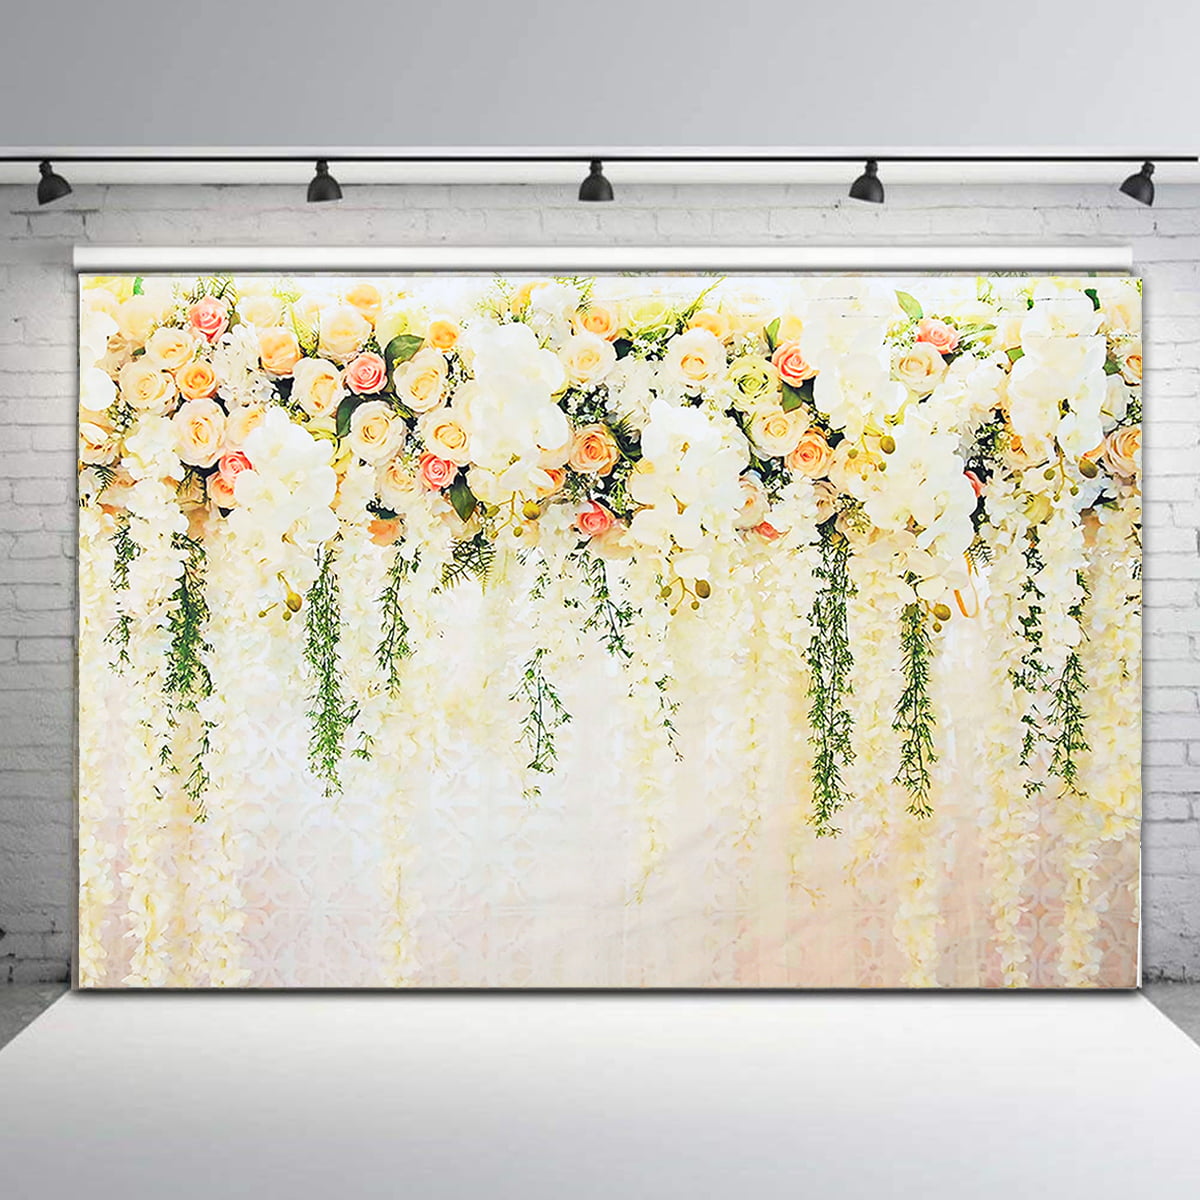 HUAYI Valentines Day Photo Backdrops for Pictures Rose Flower Wall Portraits Photoshoot Background Studio Props Baby Shower Banner 8x6ft xt-7204 